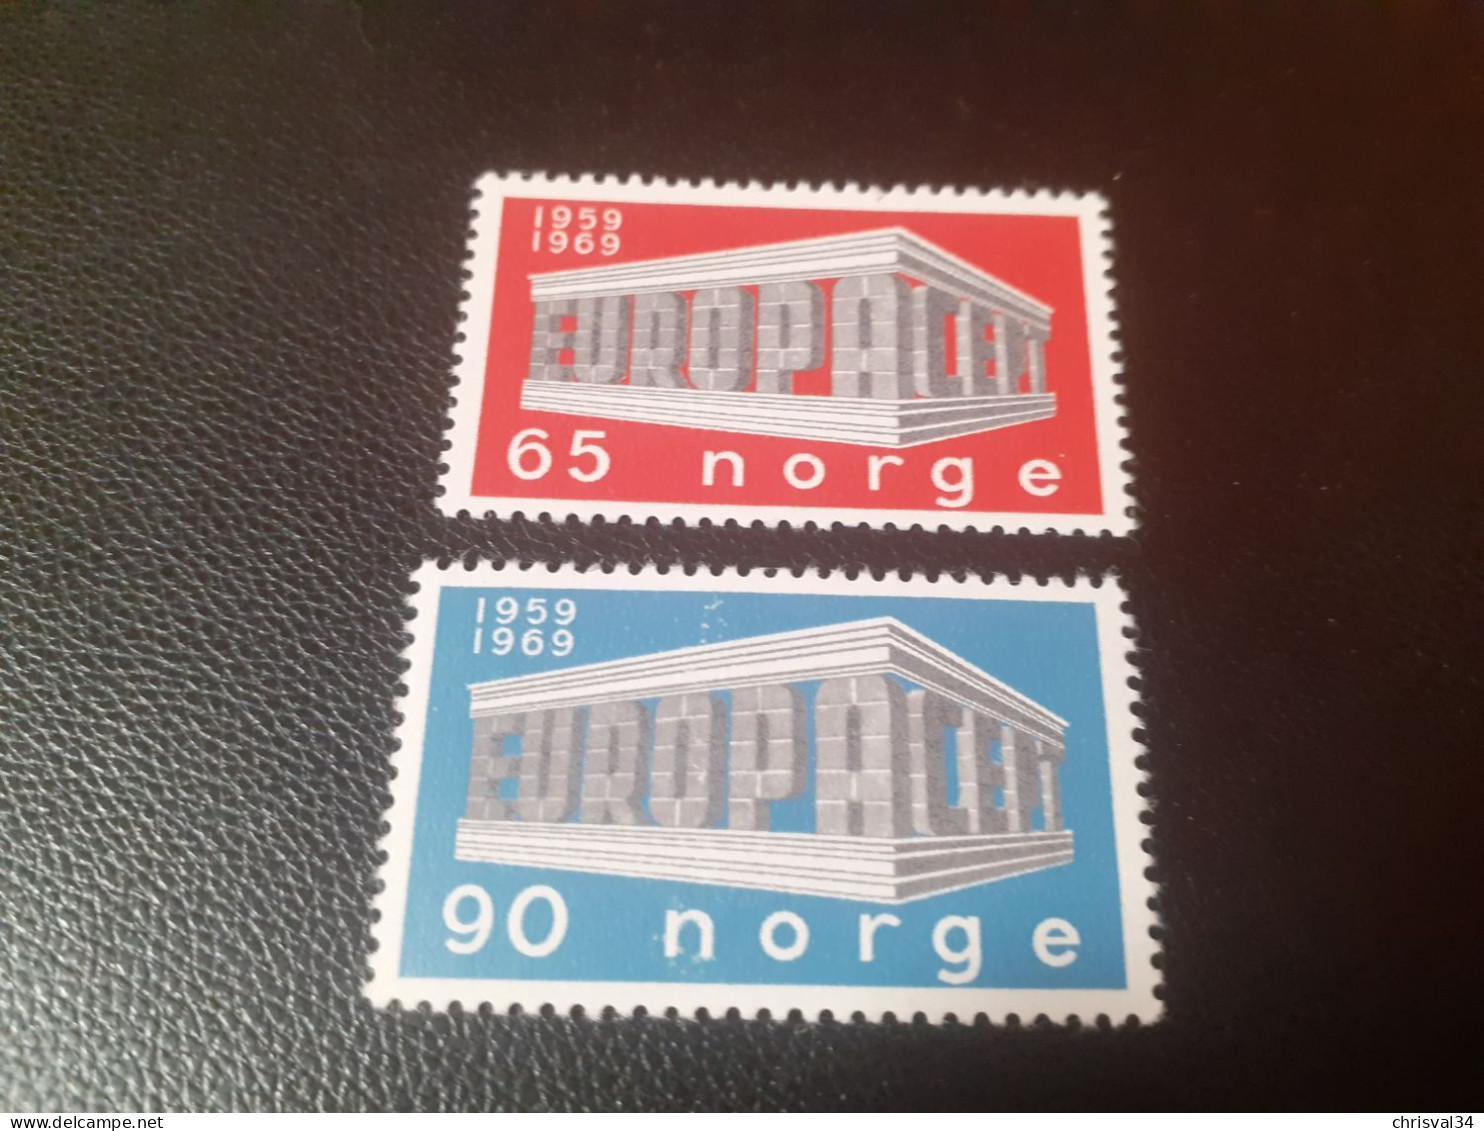 TIMBRES   NORVEGE  ANNEE 1969   N  538 / 539   COTE  3,00  EUROS   NEUFS  LUXE** - Nuovi